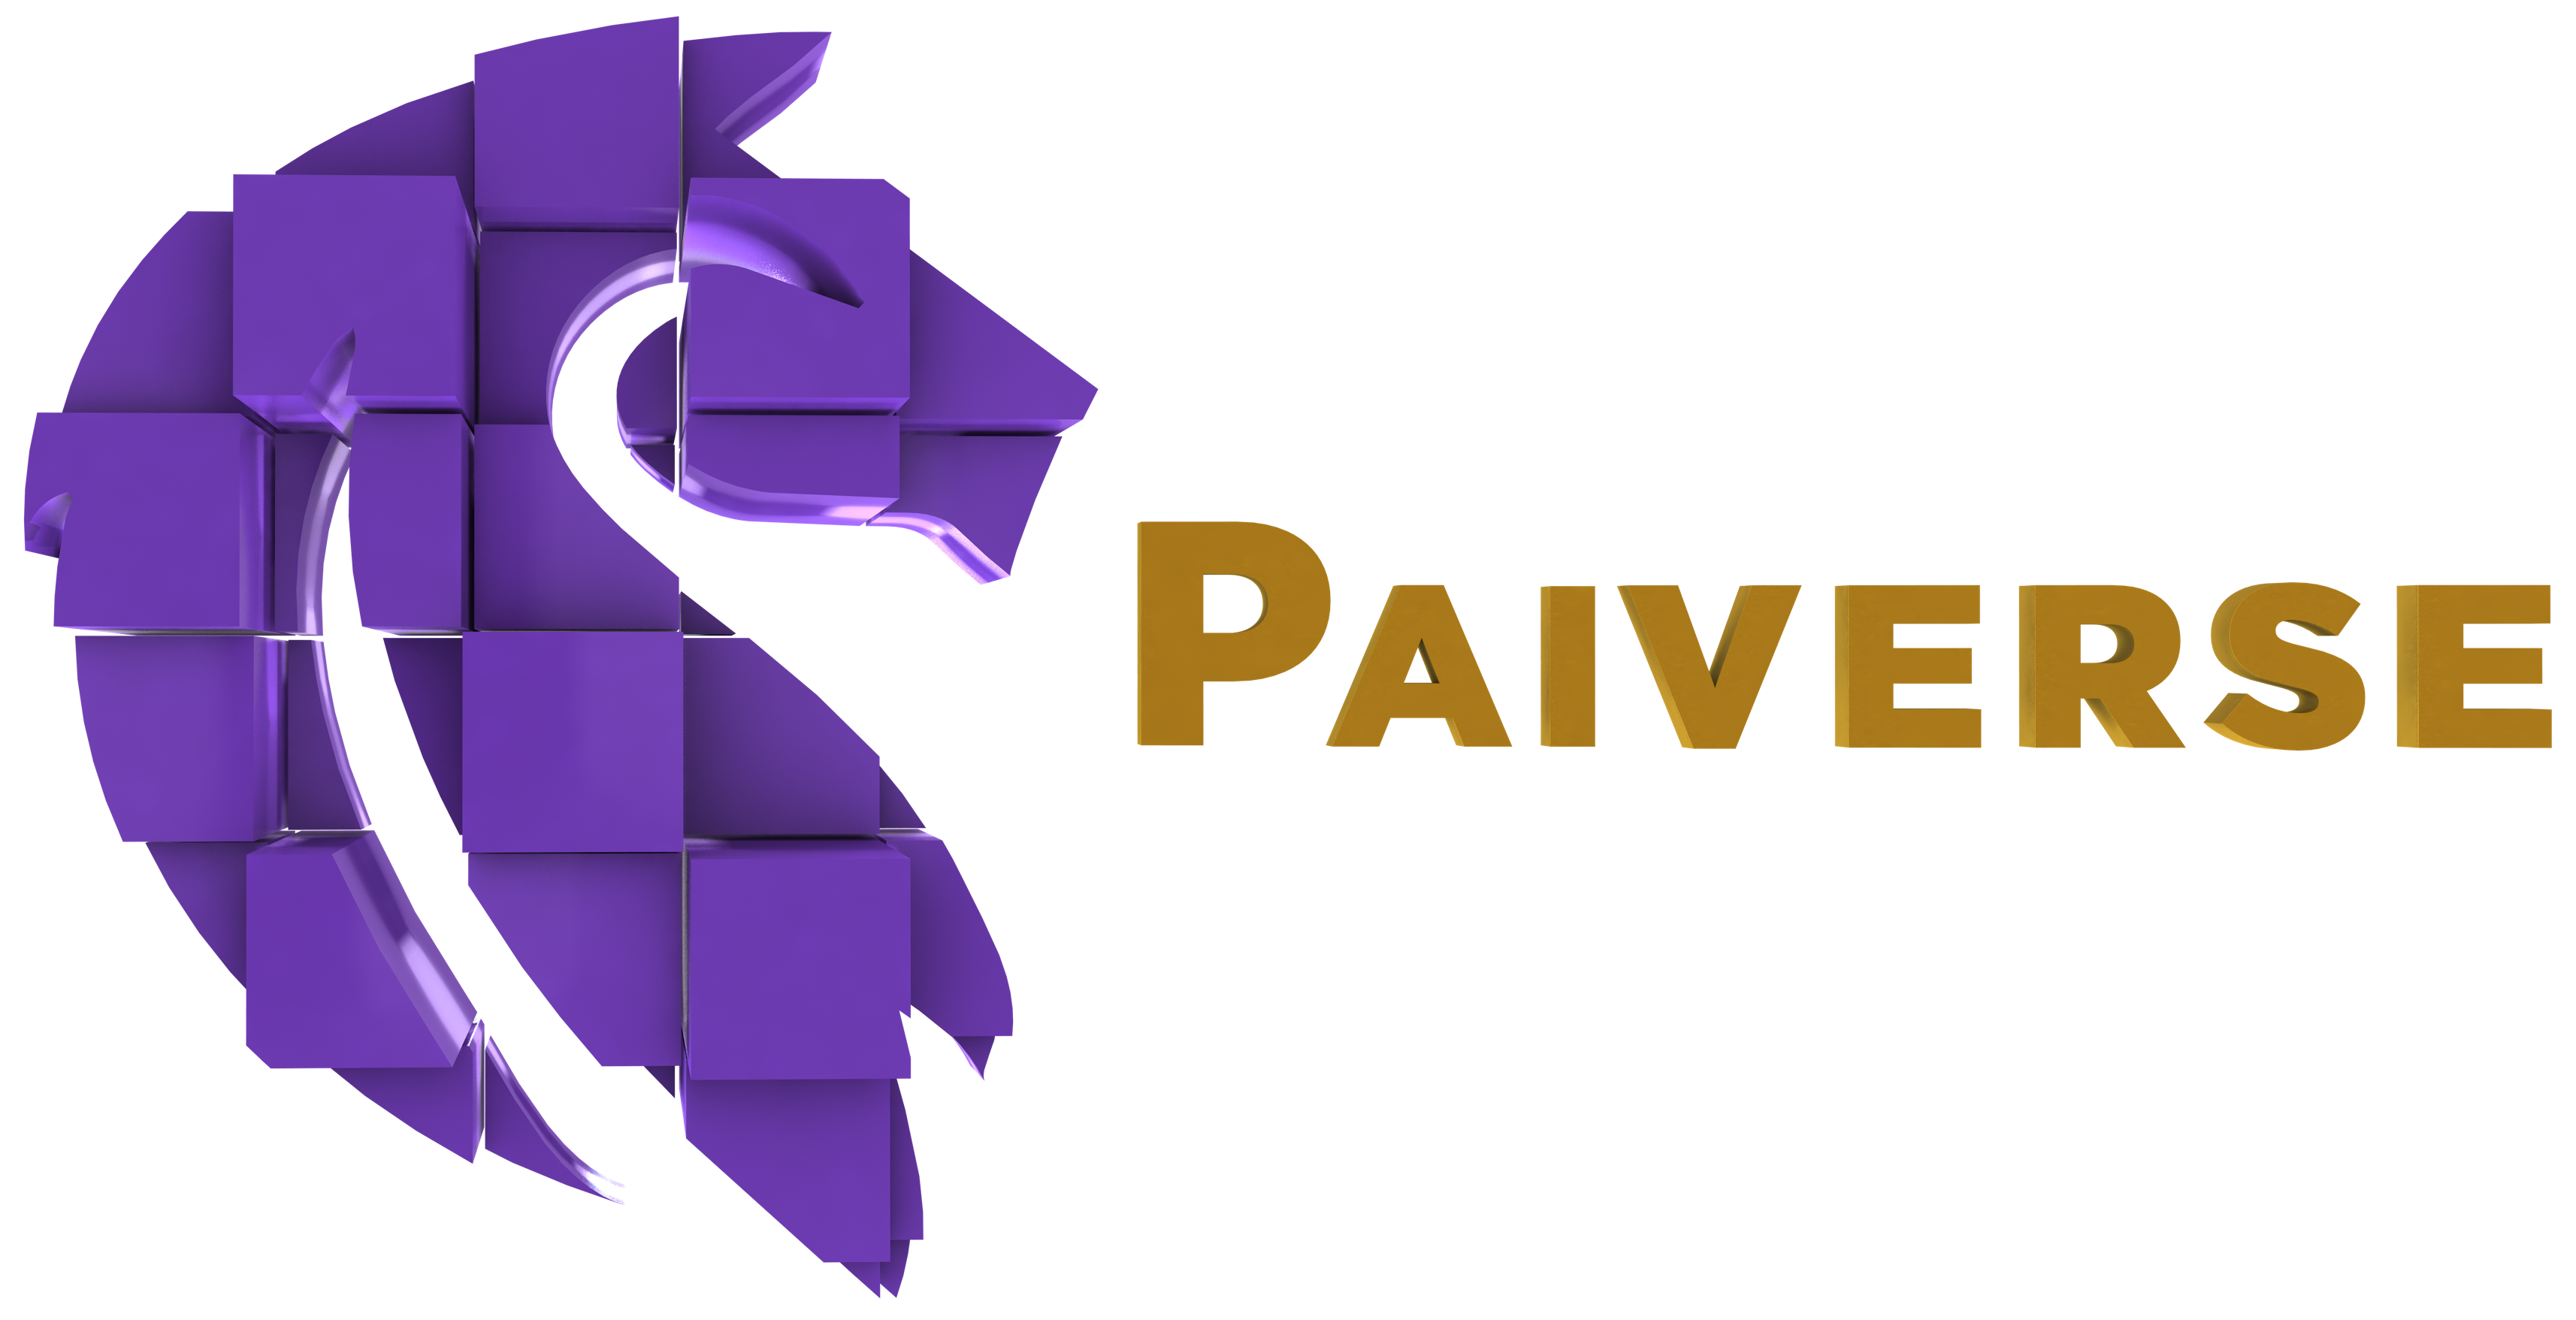 paiverse